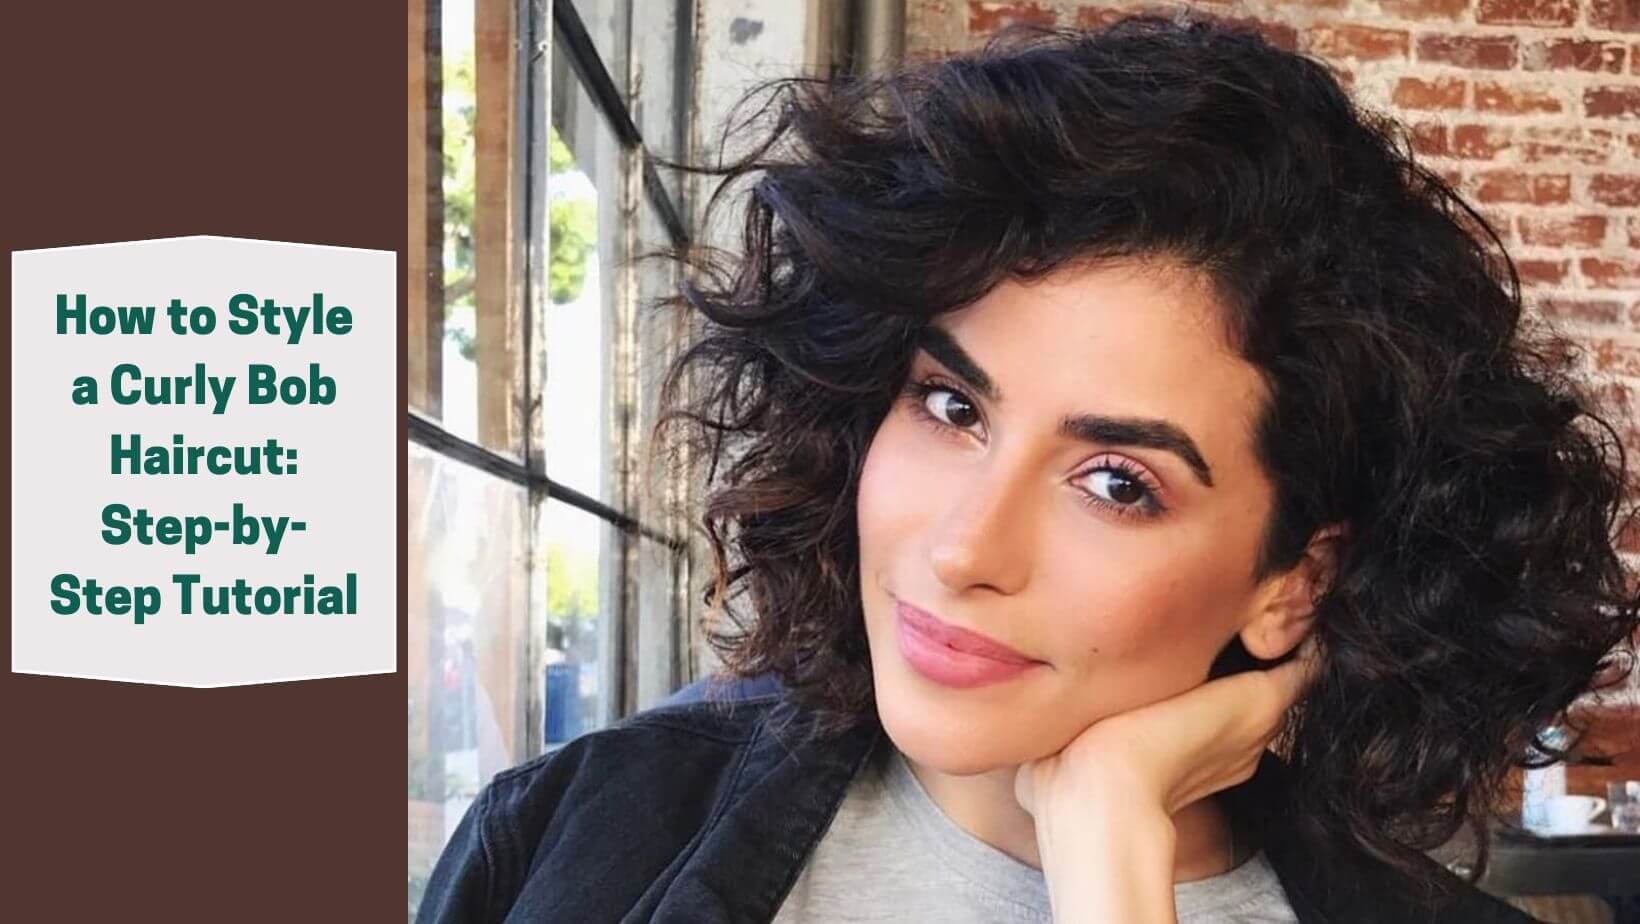 How to Style a Curly Bob Haircut